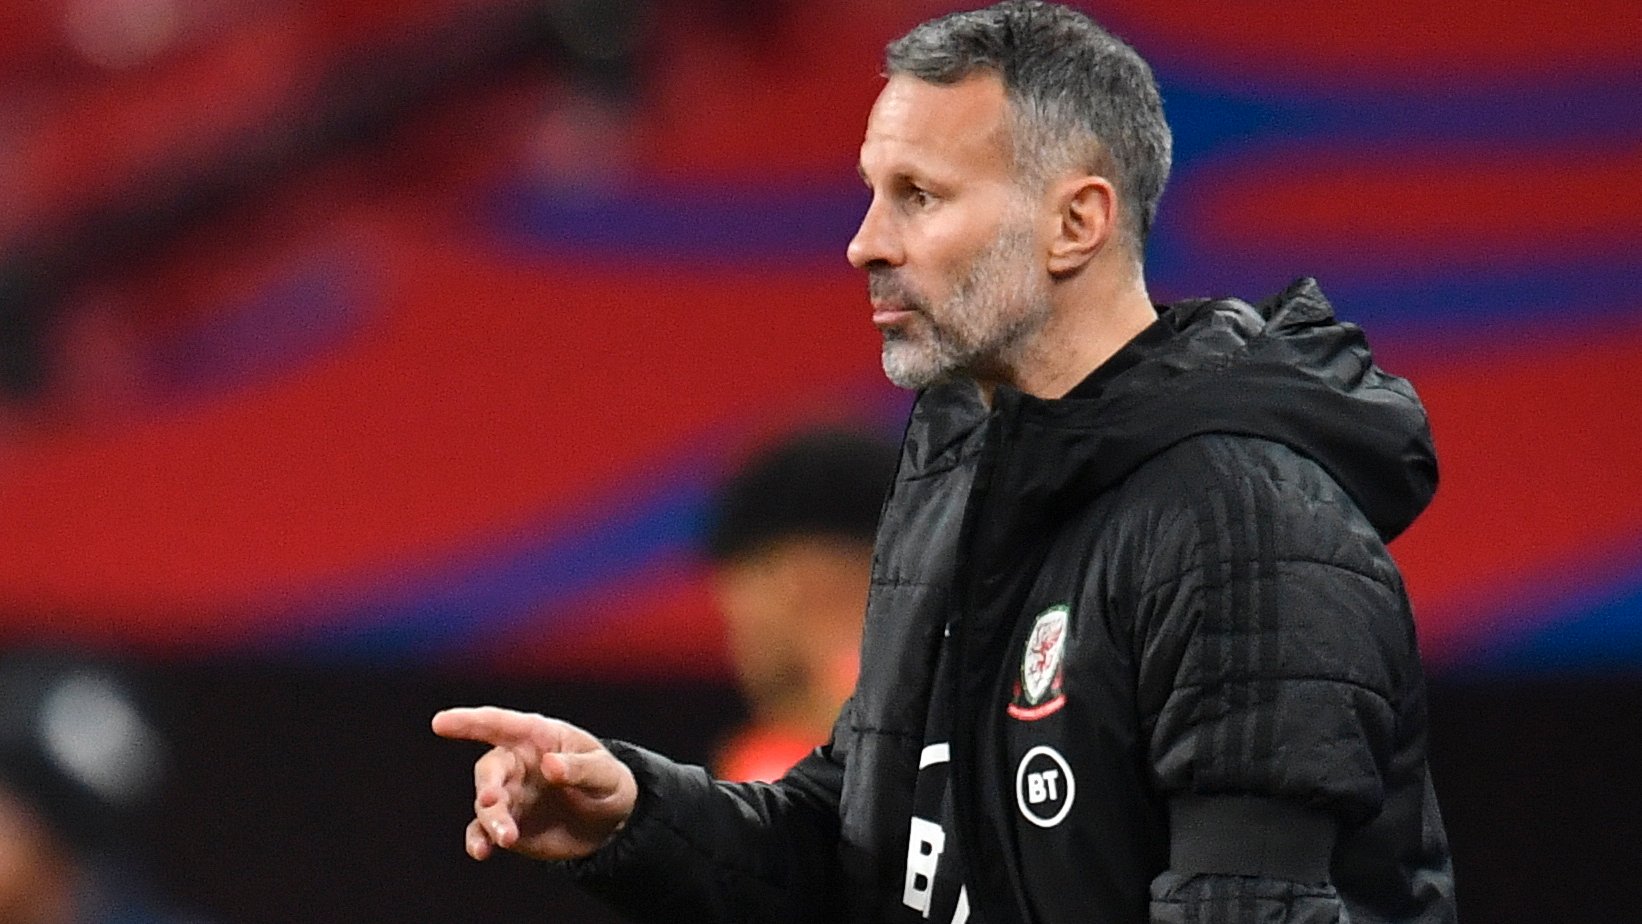 epa08795380 (FILE) - Wales&#039; head coach Ryan Giggs reacts during the international friendly soccer match between England and Wales in London, Britain, 08 October 2020 (re-issued on 03 November 2020). On 03 November 2020 the Football Association of Wales announced to have mutually agreed with Ryan Giggs &#039;that he will not be involved in the upcoming international matches against USA, Republic of Ireland and Finland&#039;. Assistant coach Robert Page &#039;will take charge of the team&#039;. Giggs, according to media reports, was arrested and later released on bail over an alleged incident involving his girlfriend.  EPA/Glyn Kirk / POOL *** Local Caption *** 56405473